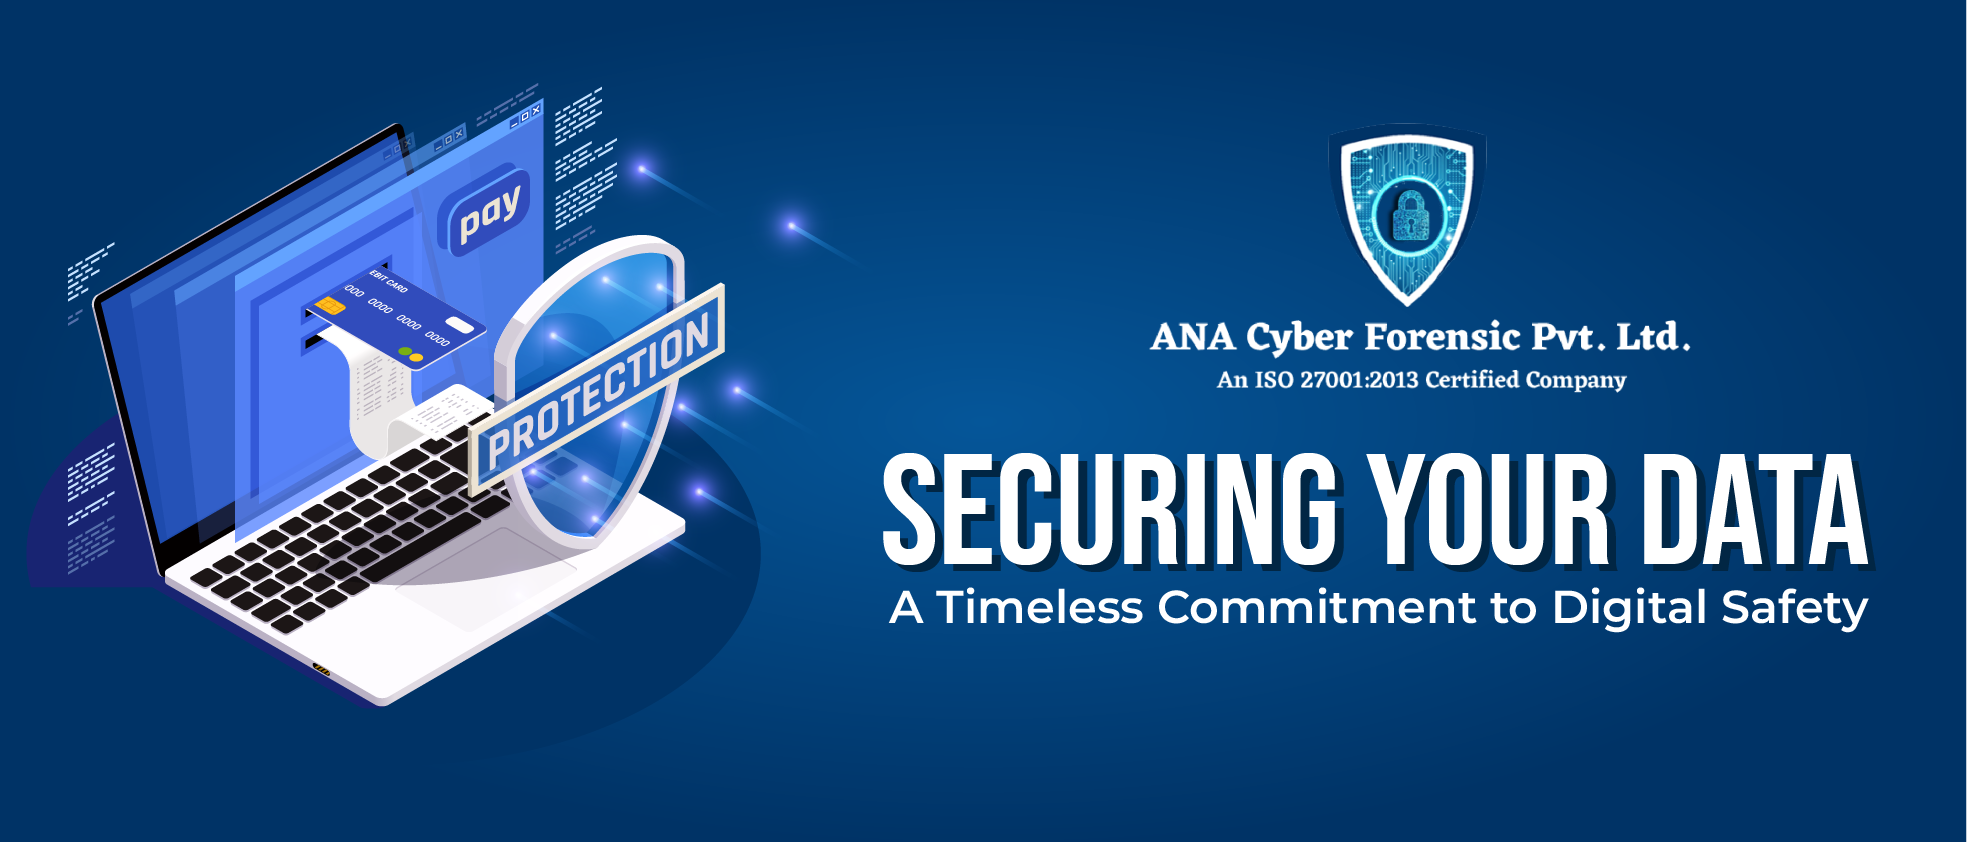 Securing Your Data: A Timeless Commitment to Digital Safety